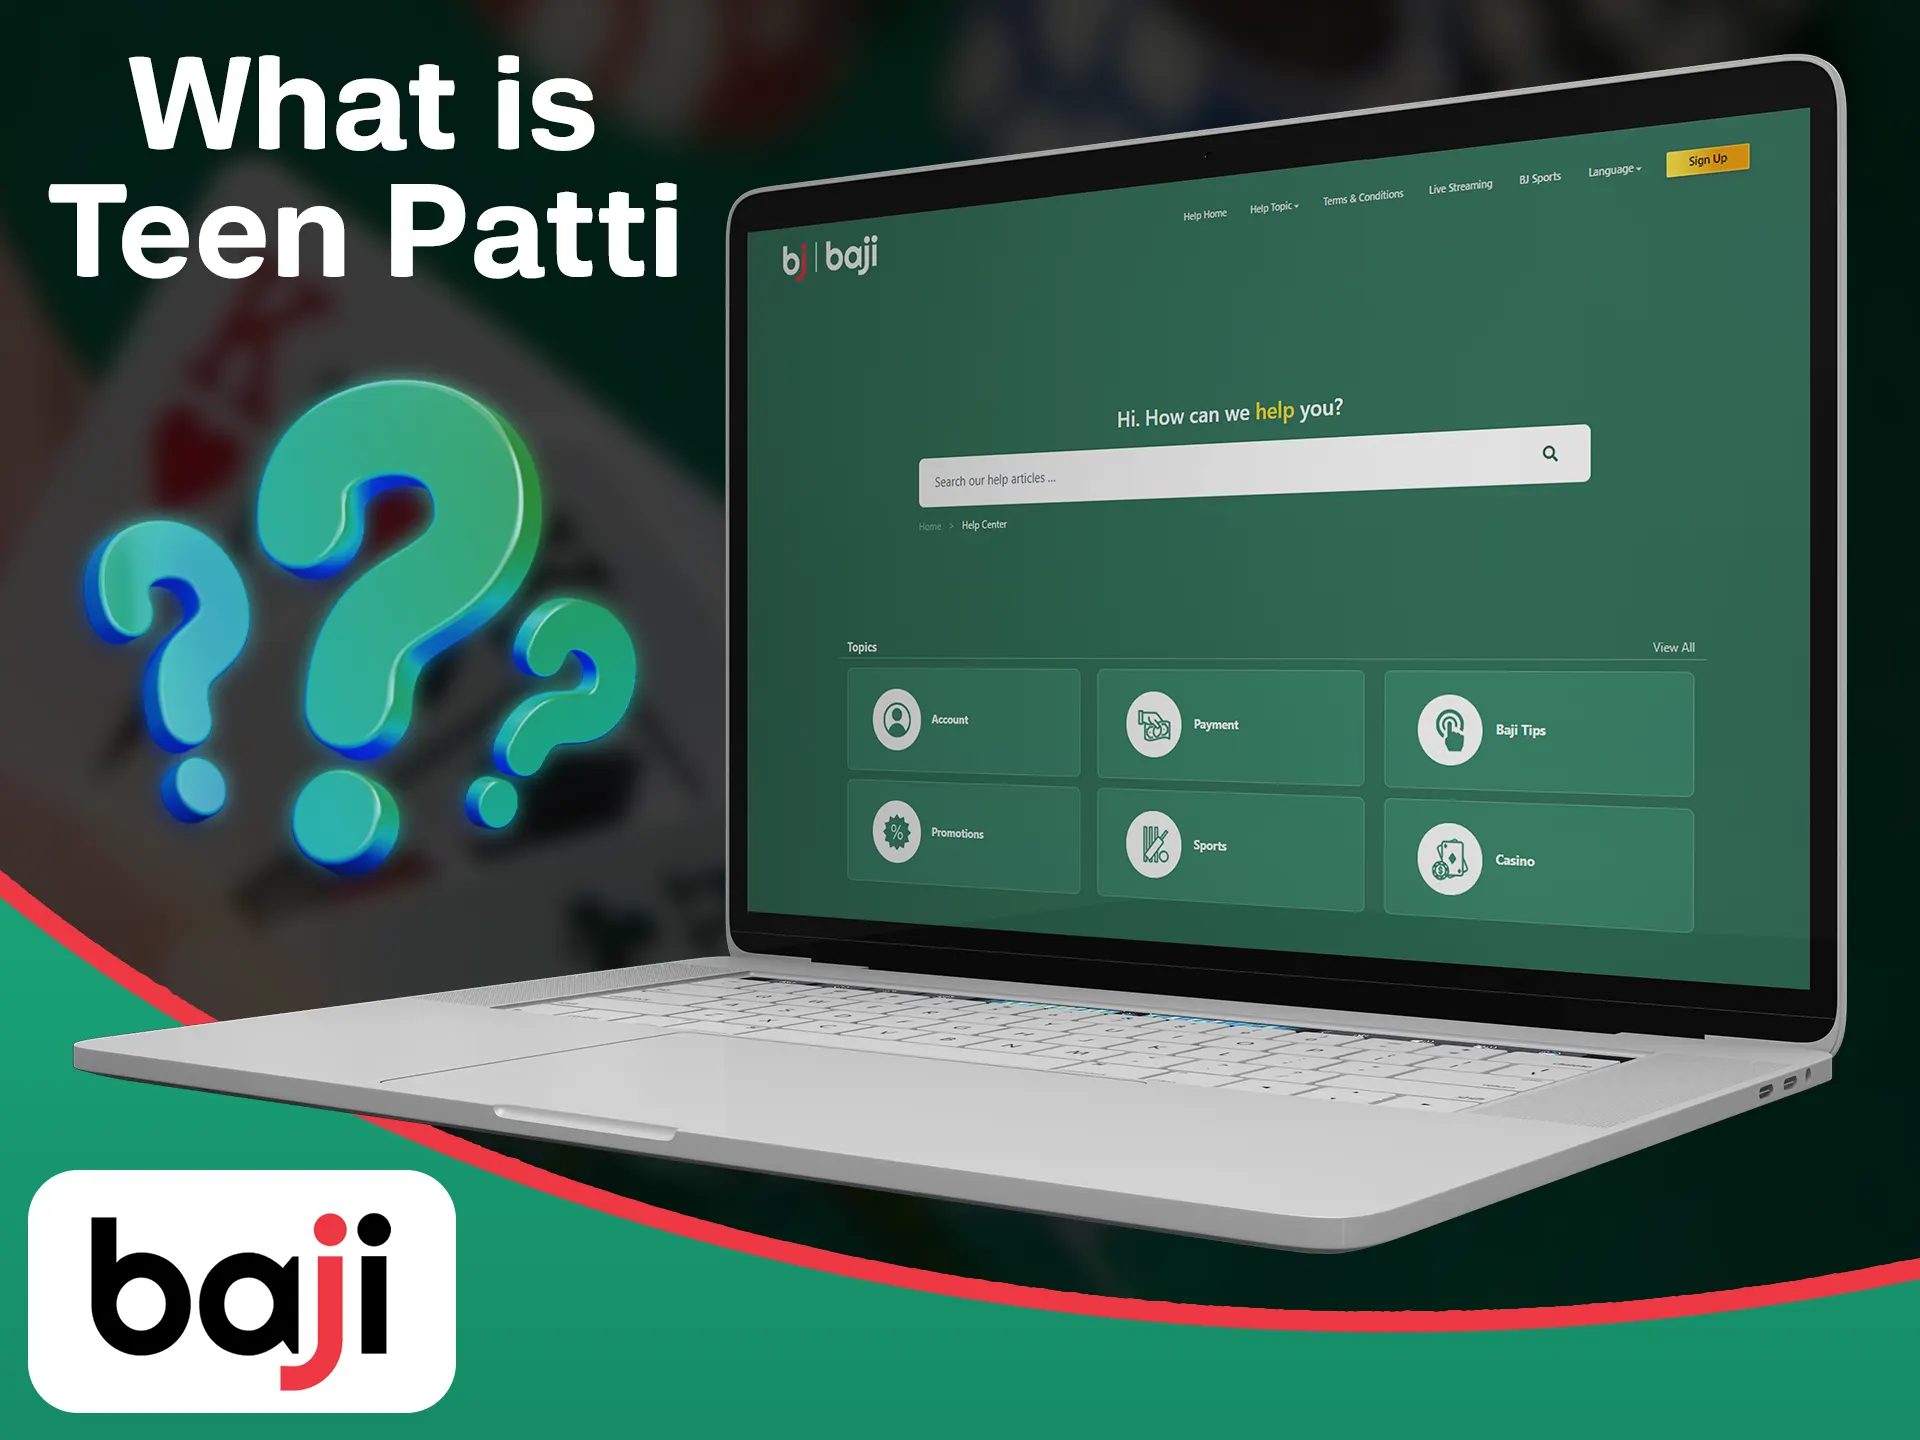 Learn more about teen patti game on the special Baji page.